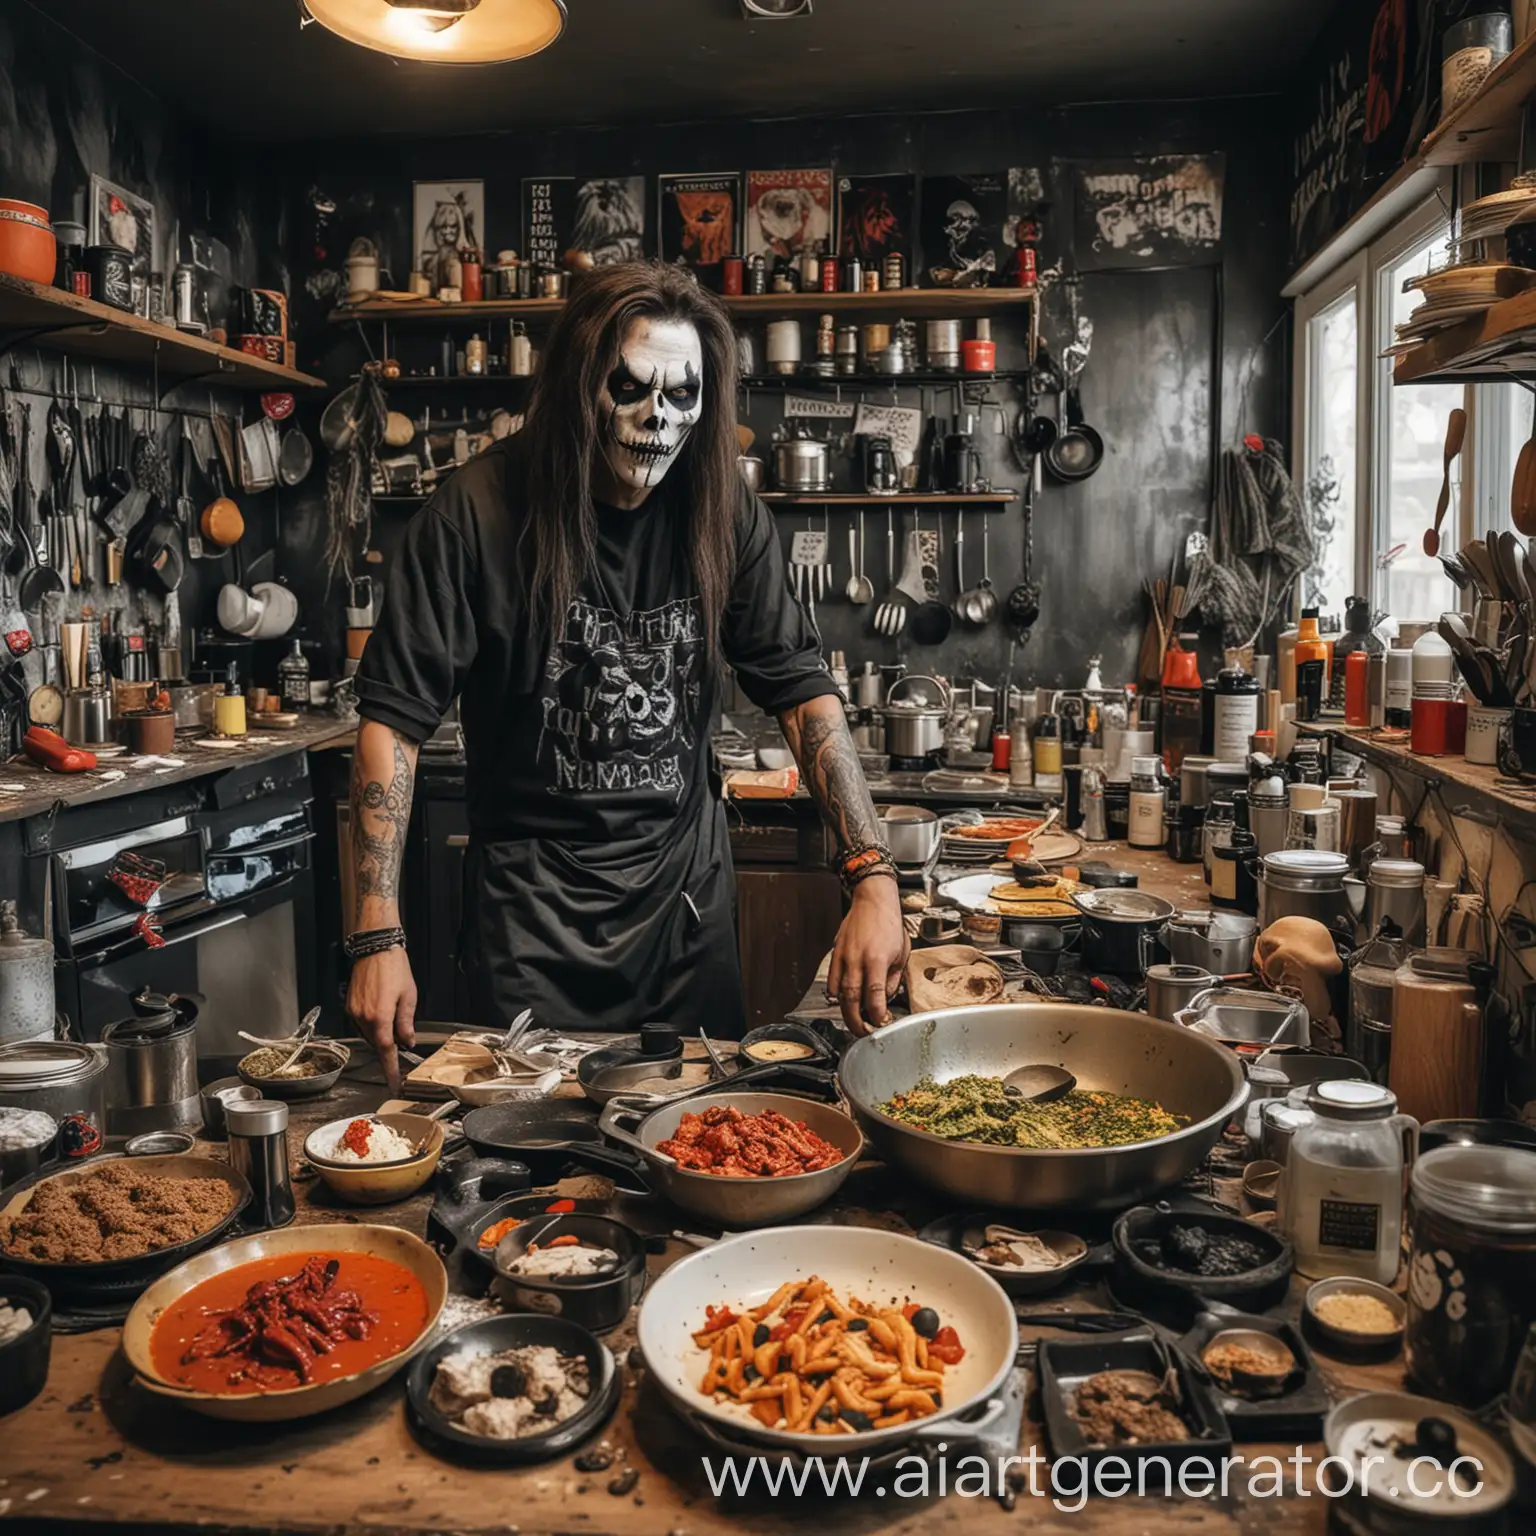 Man-Cooking-Various-Dishes-in-MetalInspired-Kitchen-Scene